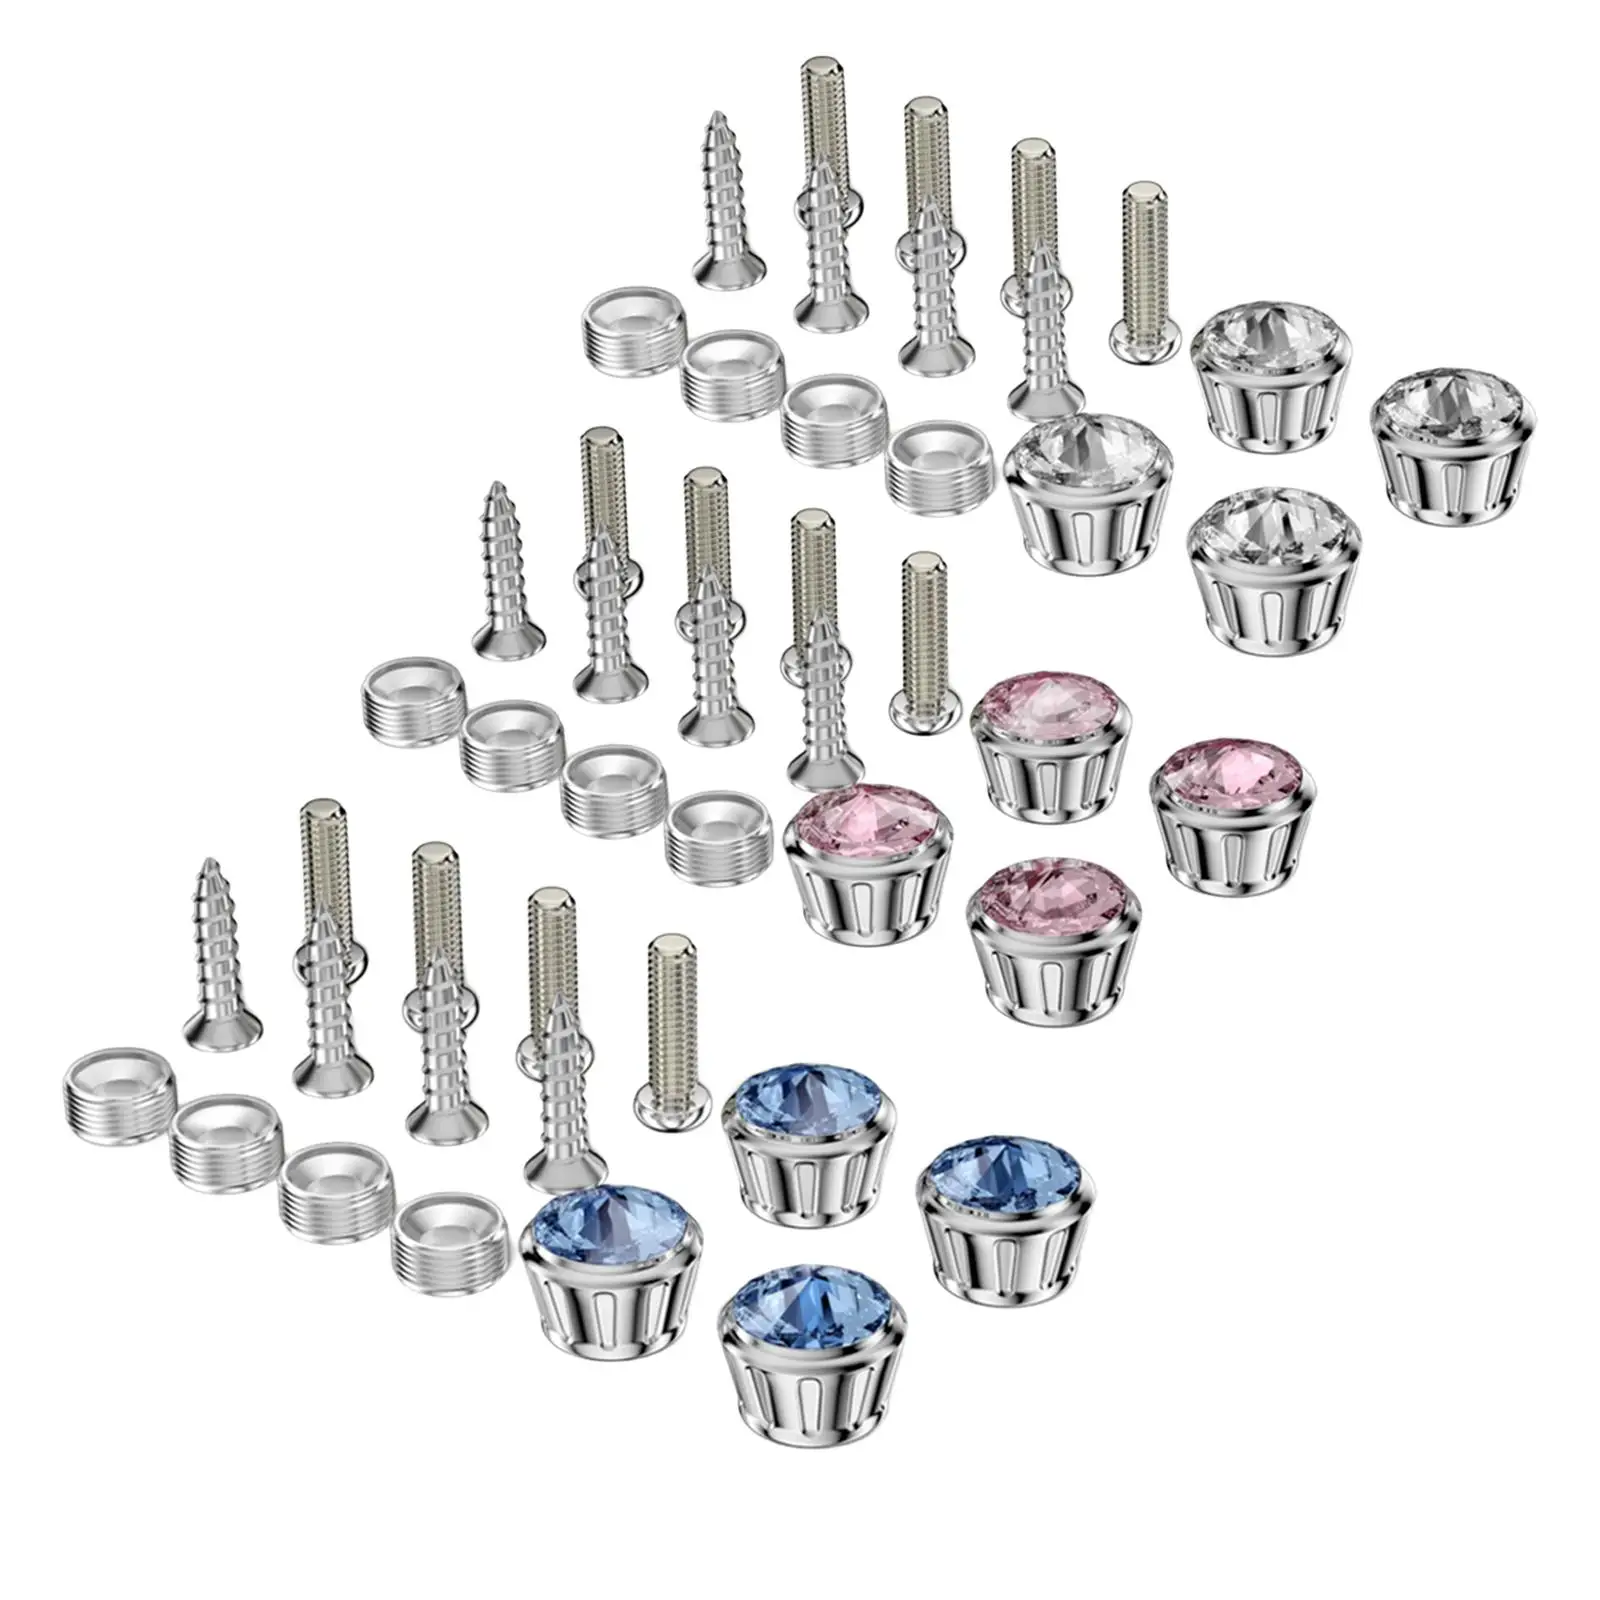 16Pcs Car Anti Theft License Plate Screws Kit CNC Aluminum Alloy Vehicle Parts Rust Proof License Plate Bolts Fit for Tag Frame